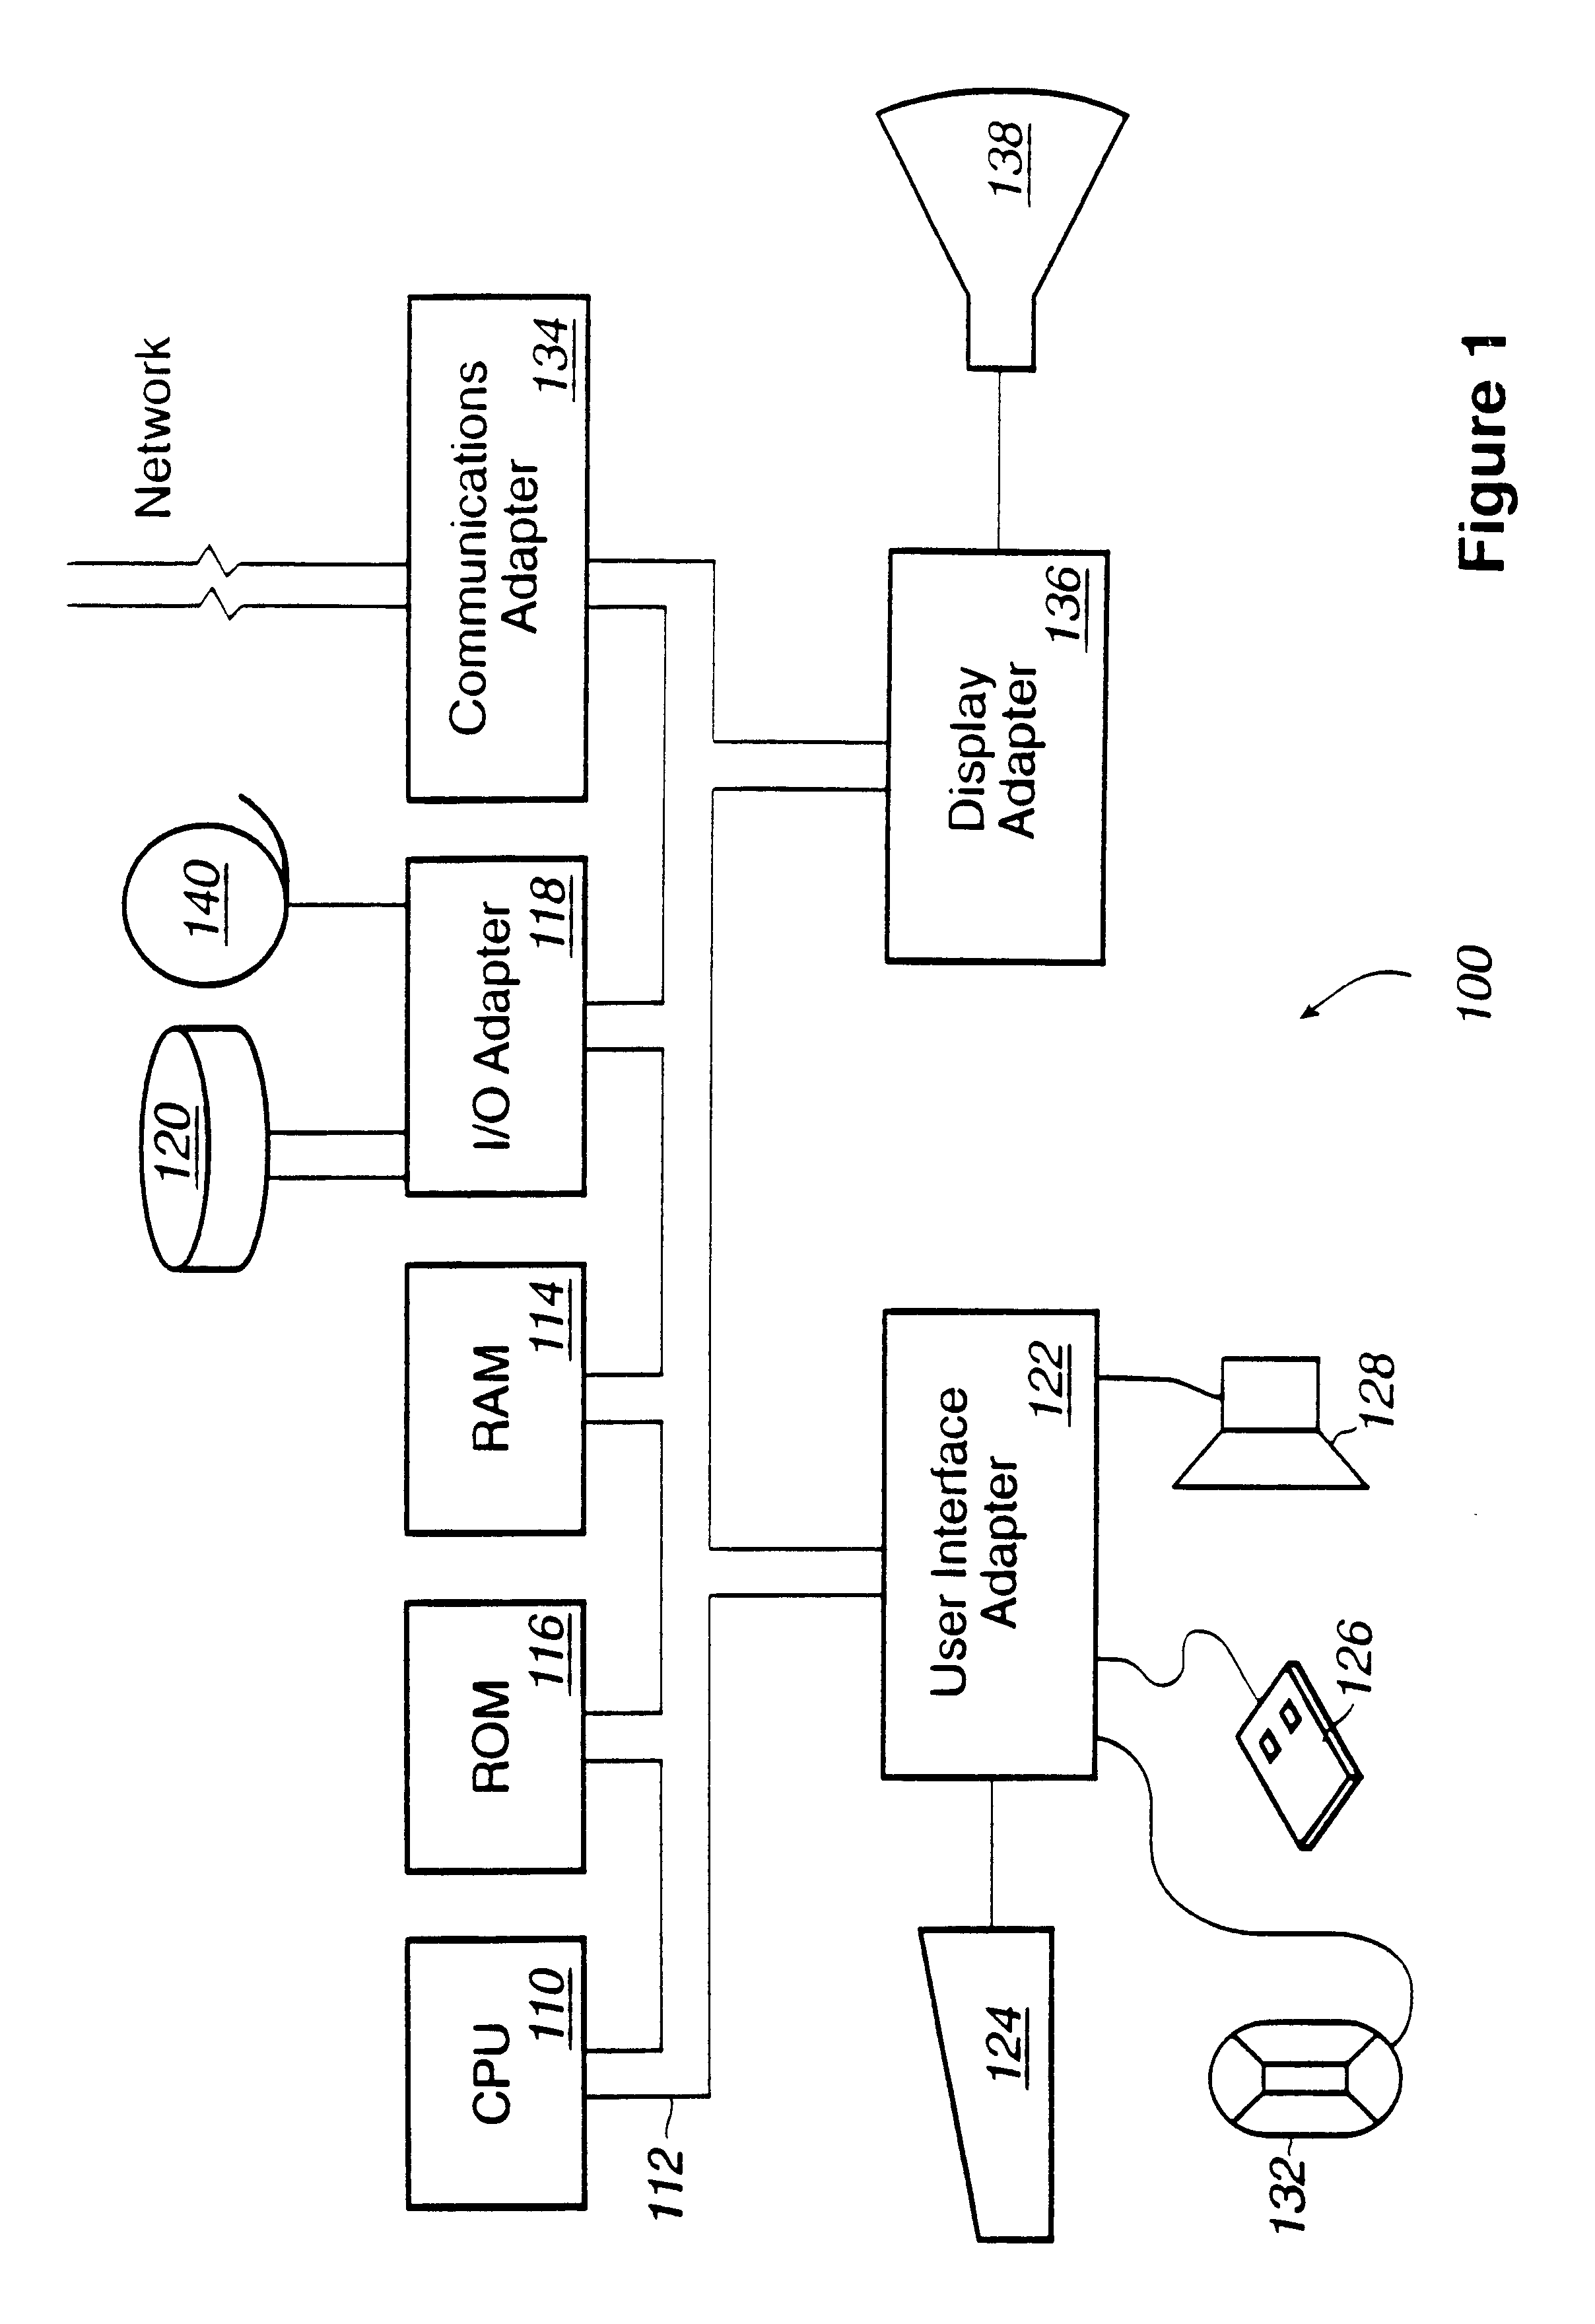 Graphical control system, method, and product for task navigation